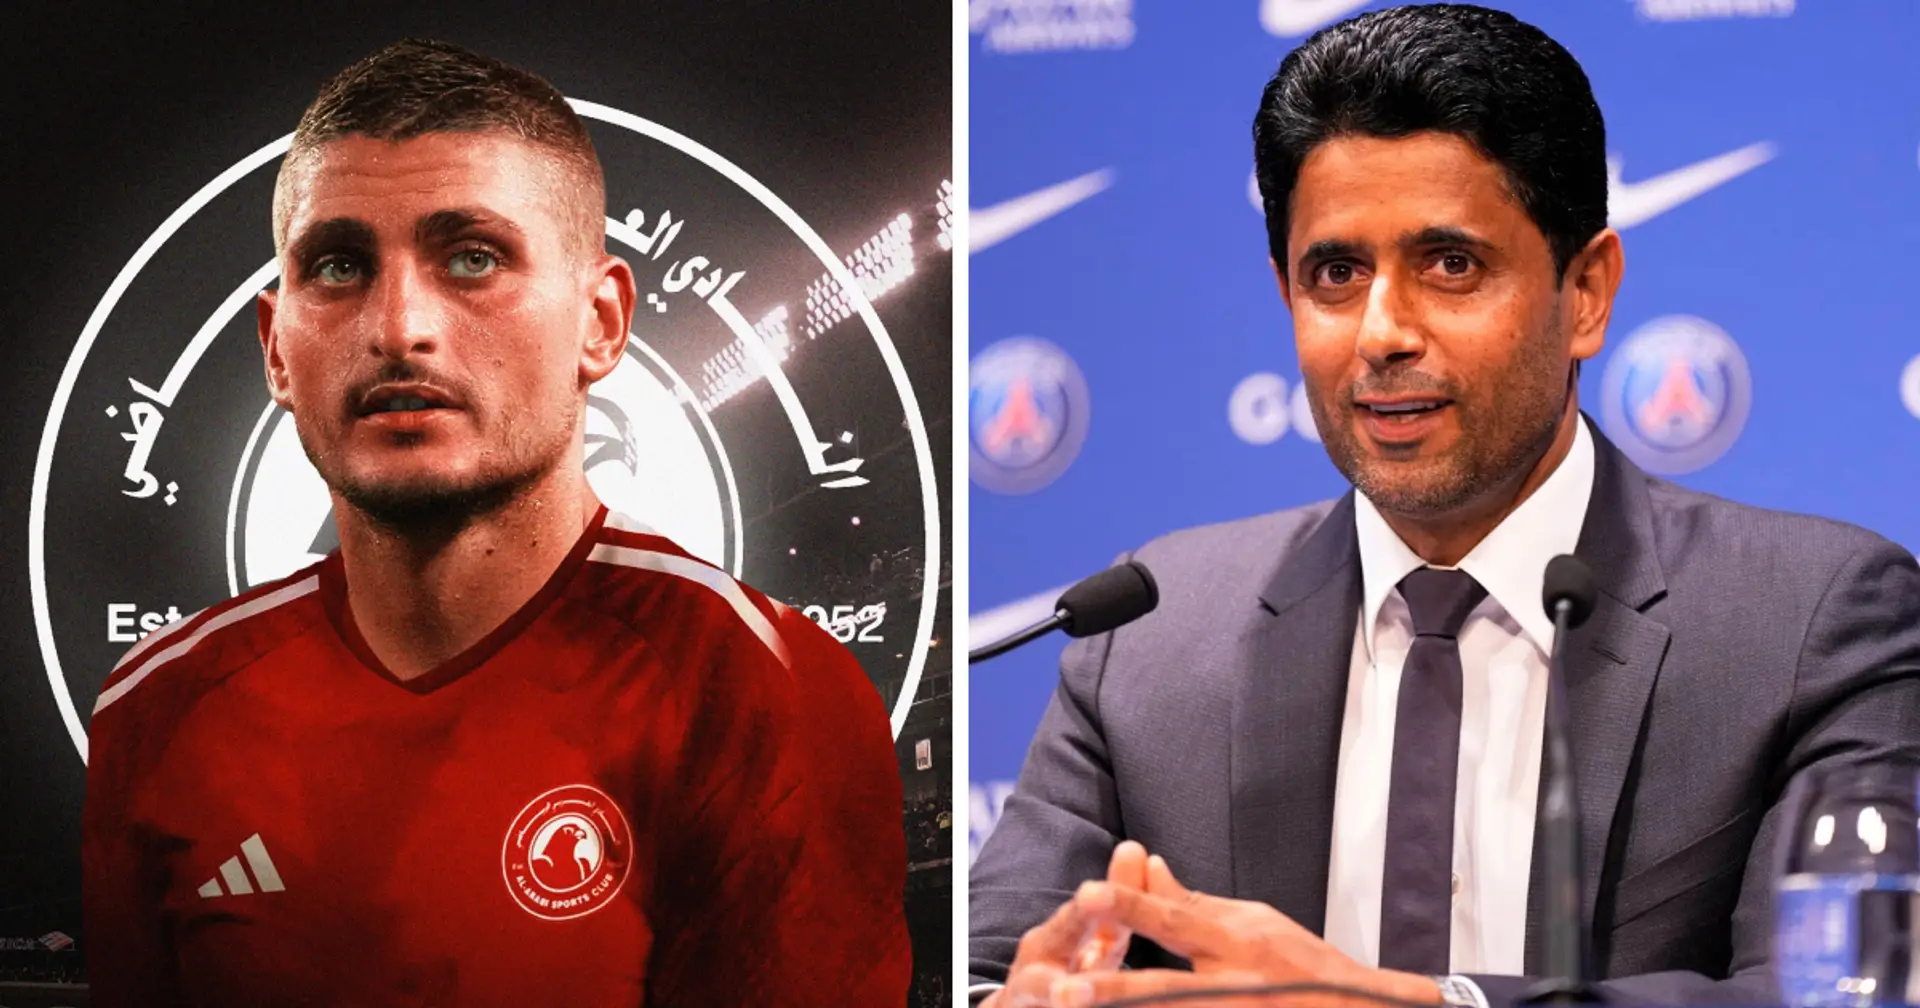 'Cooking the books. Lovely': Fans react as Marco Verratti quits Qatar-owned PSG for Qatar league